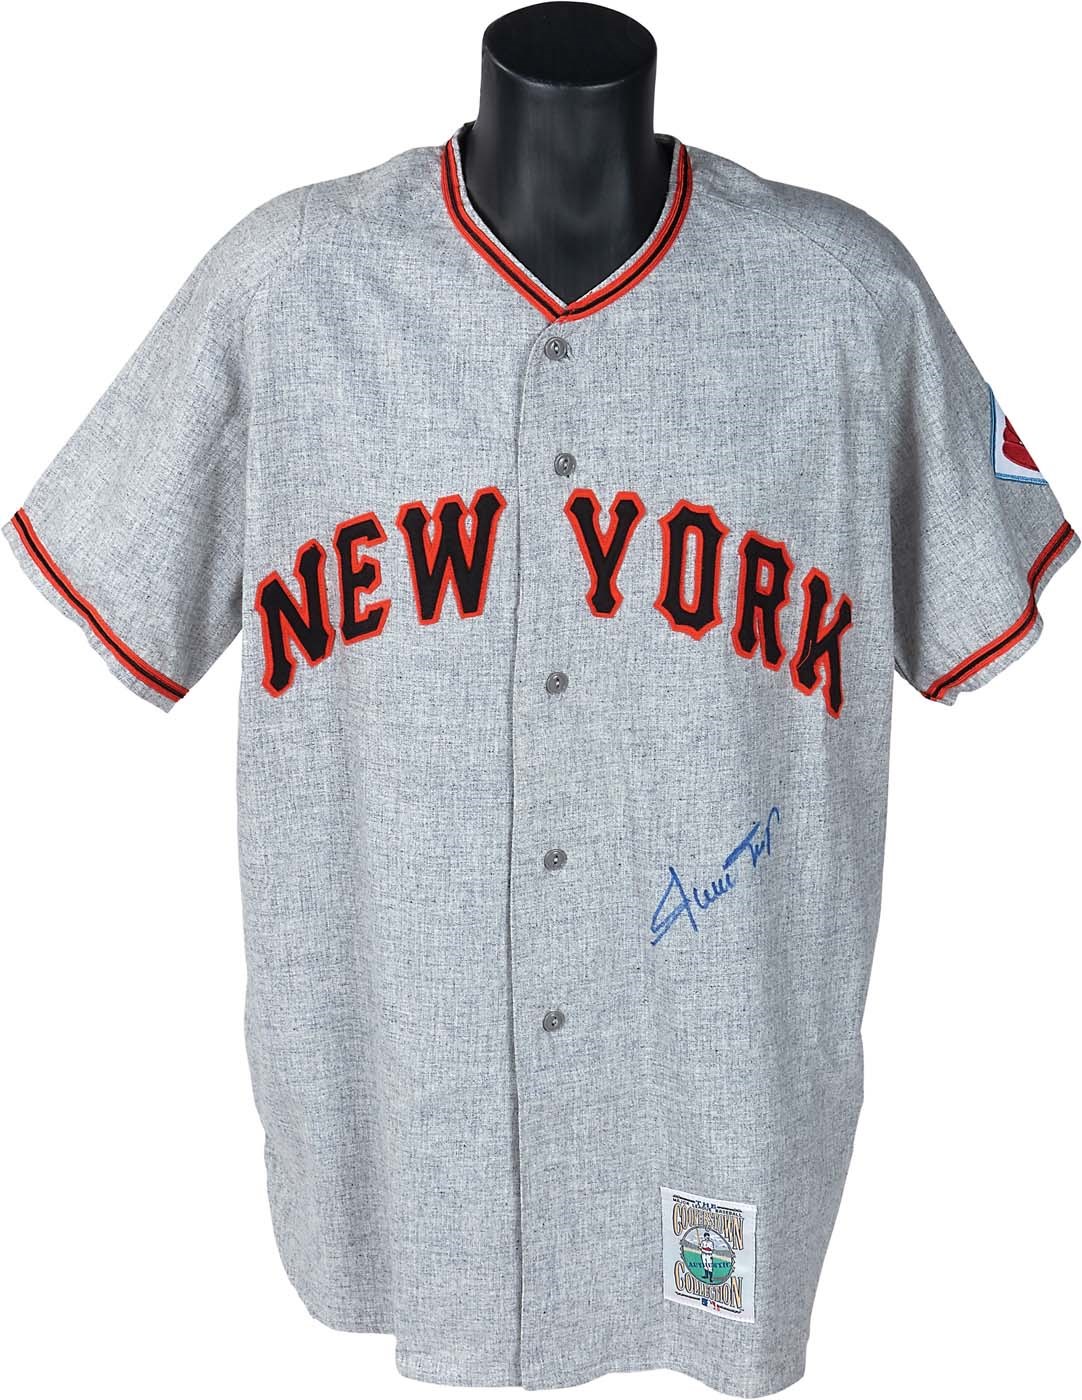 NY Yankees, Giants & Mets - Willie Mays Signed Mitchell & Ness Jersey